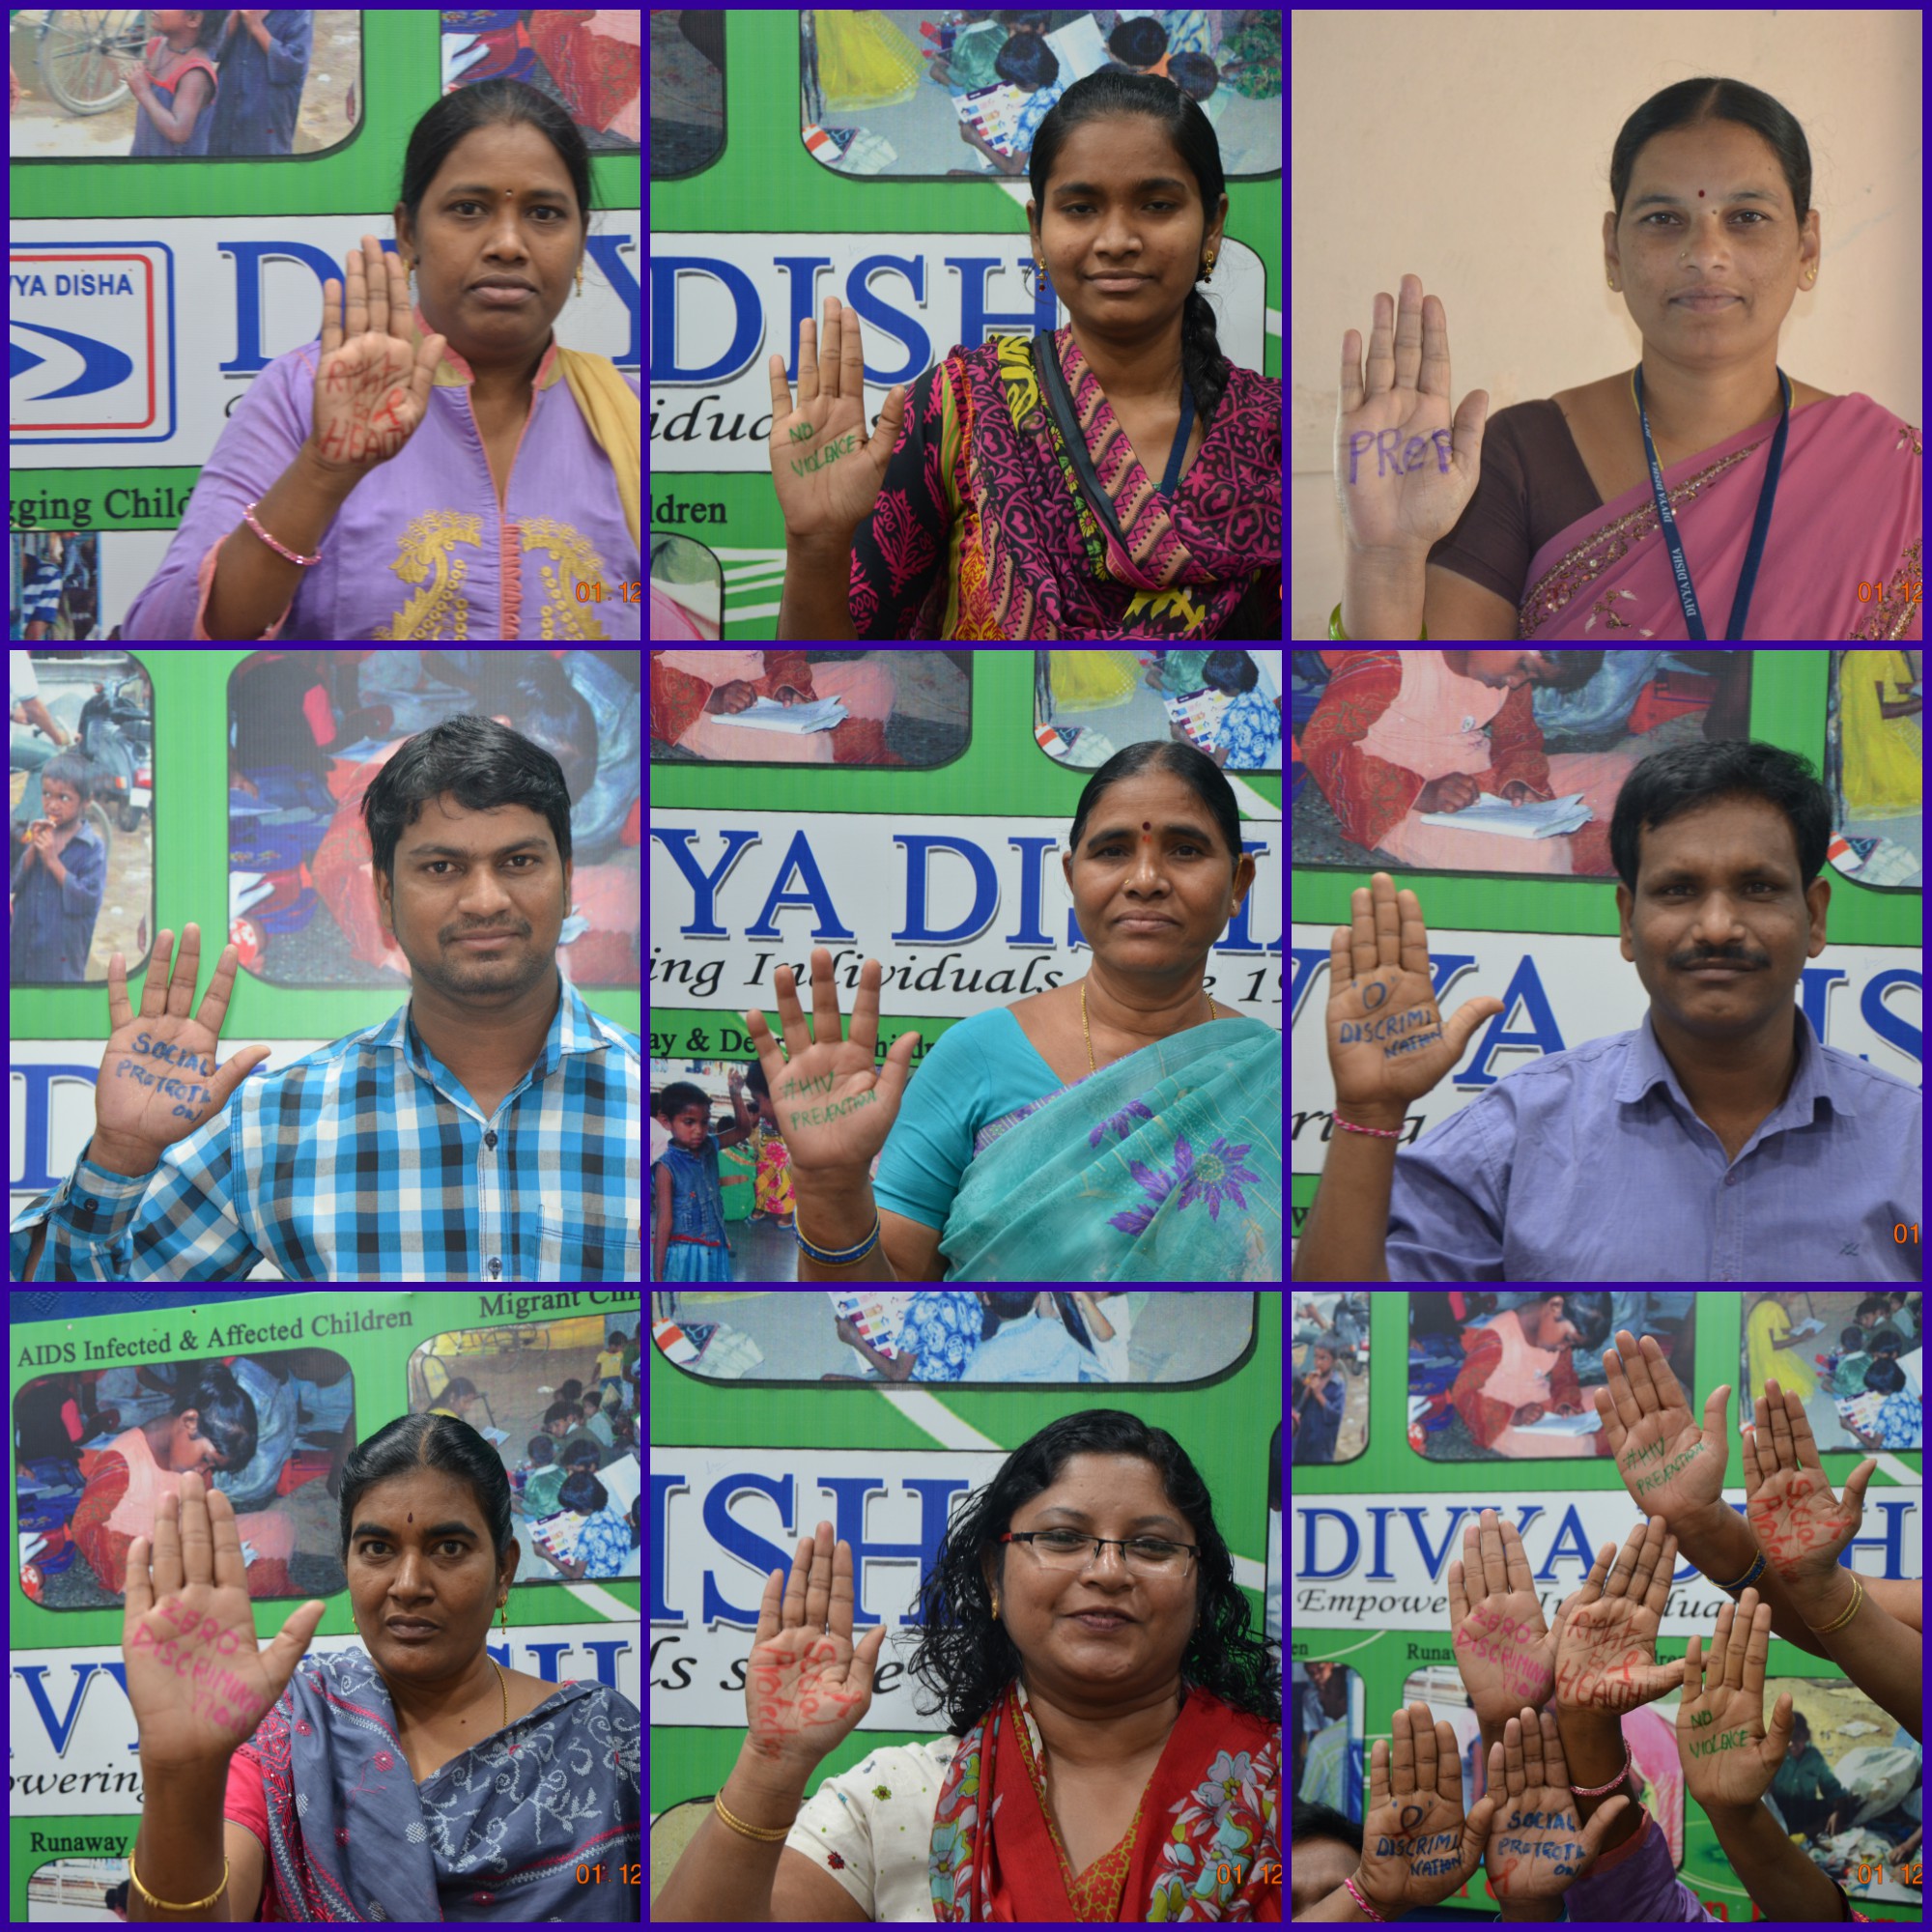 Hands Up For HIVPrevention